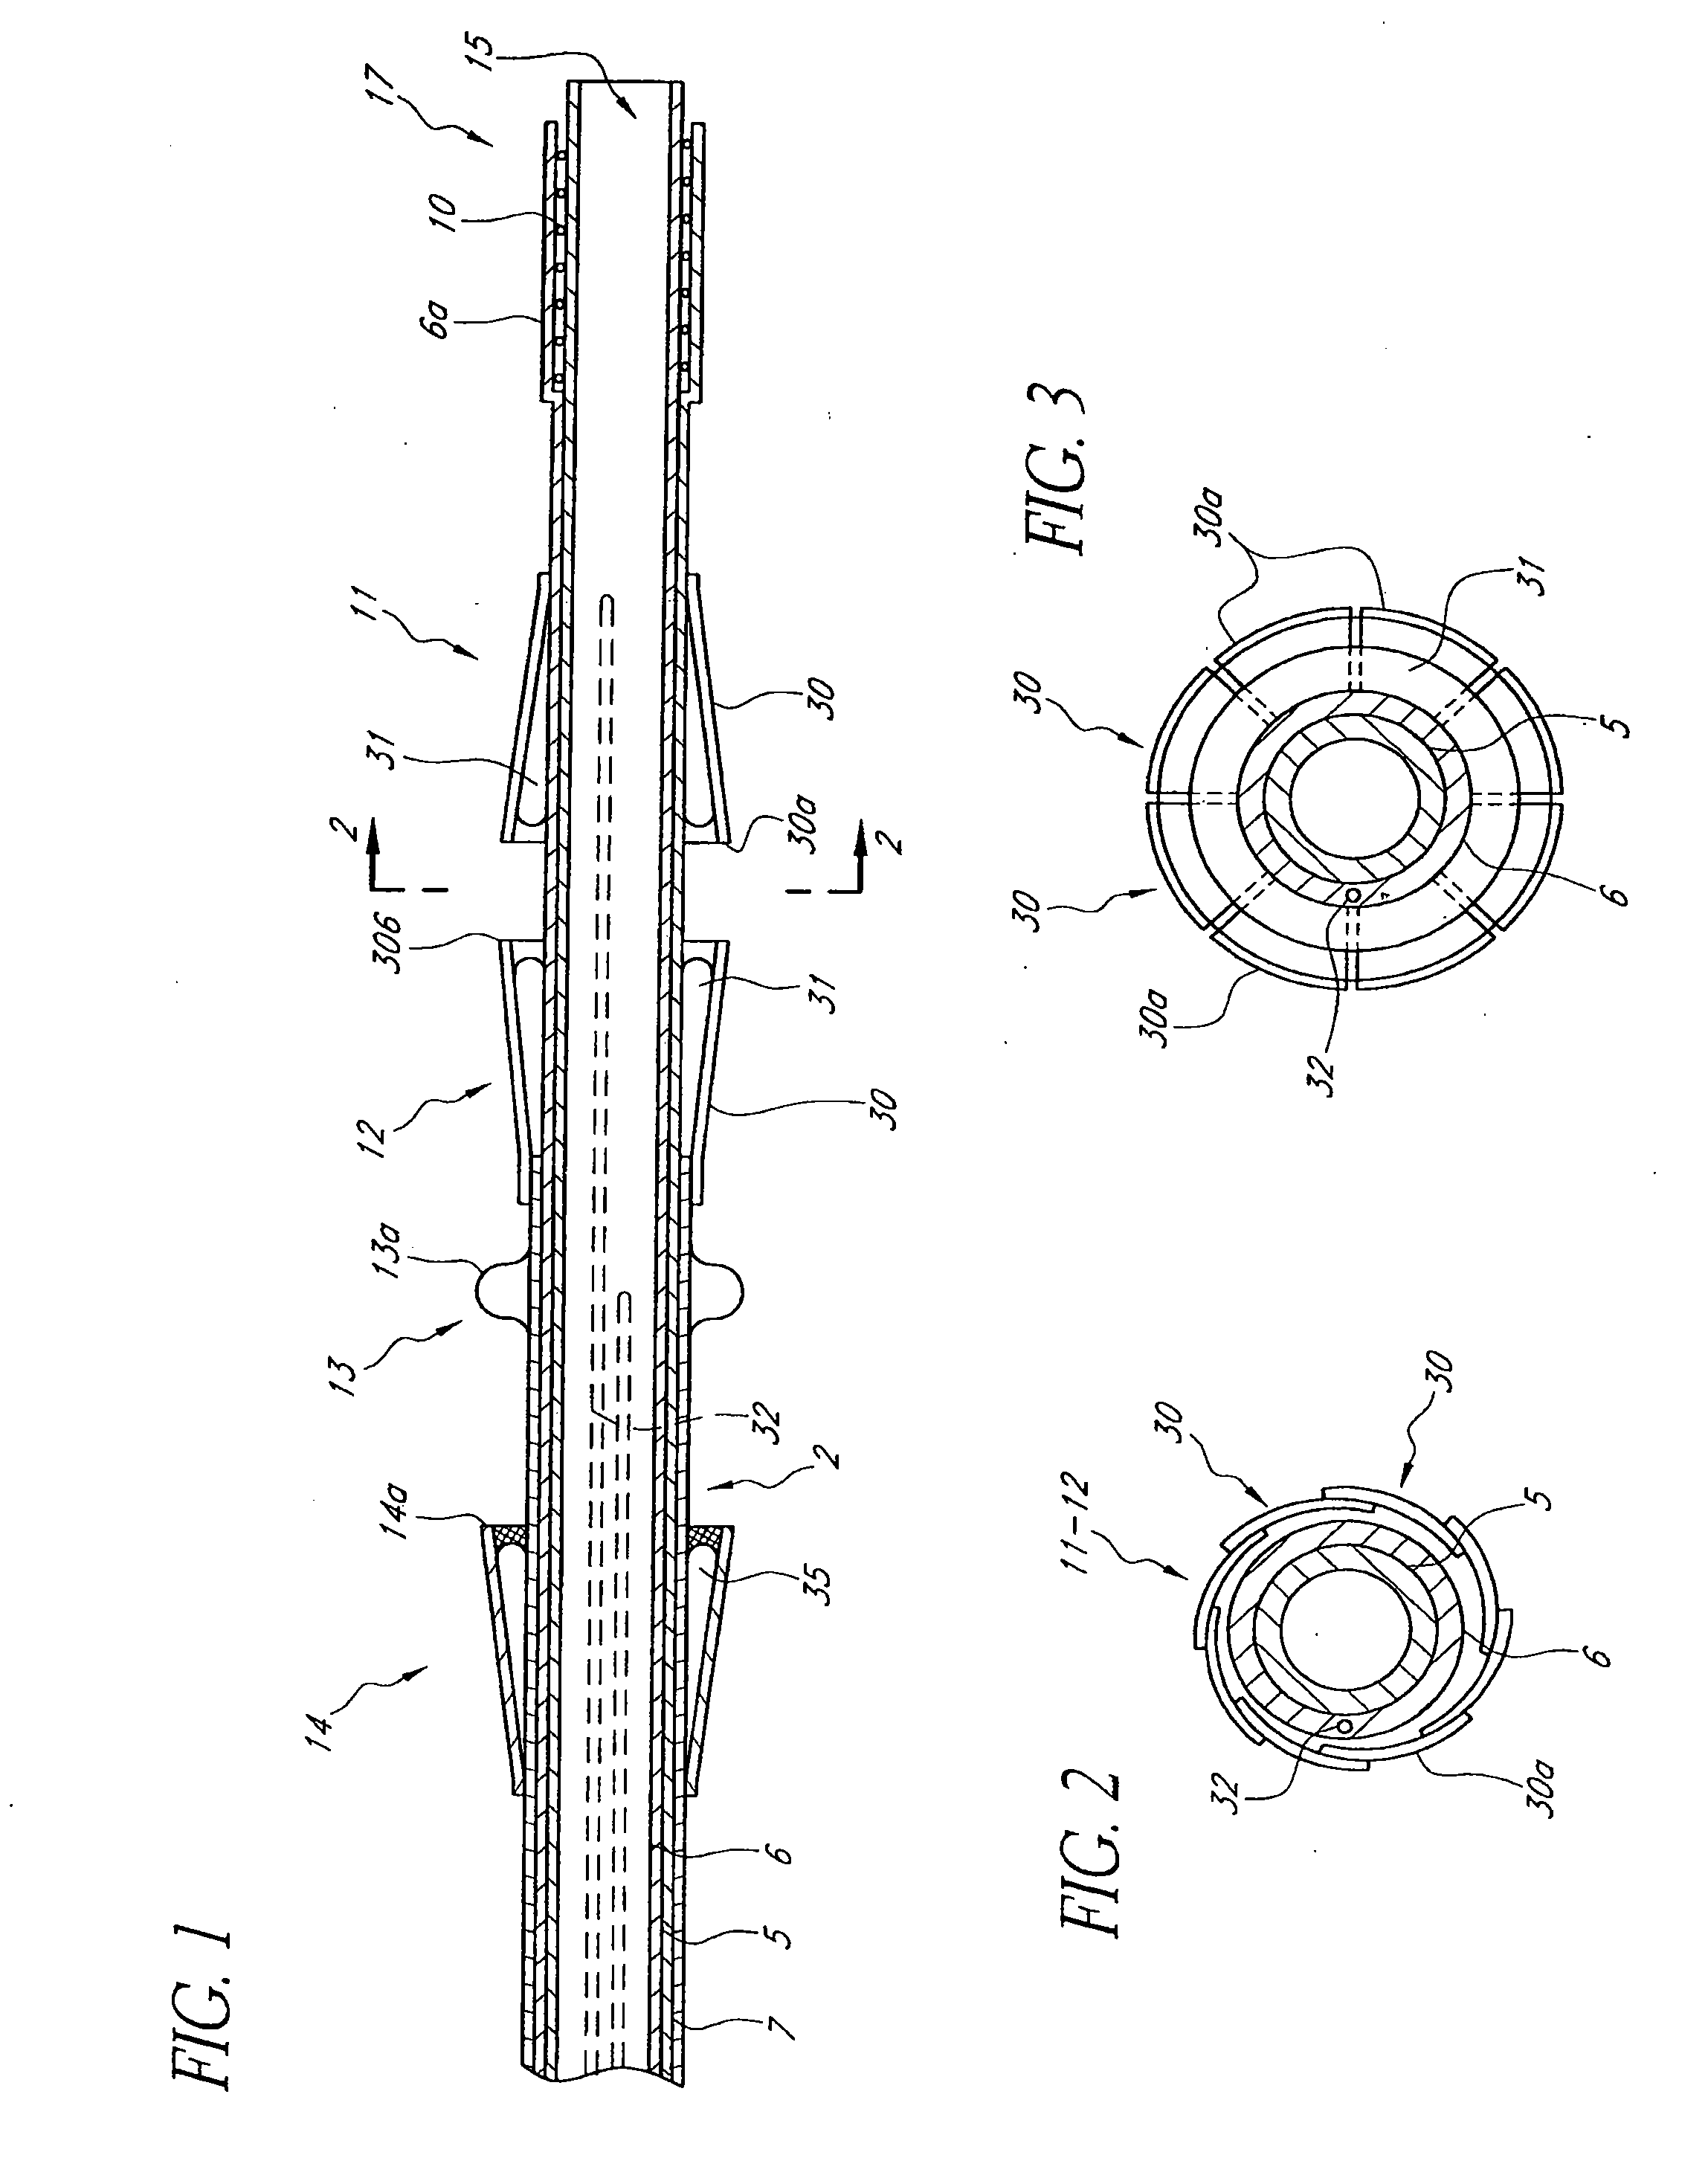 Prosthetic Valve for Transluminal Delivery